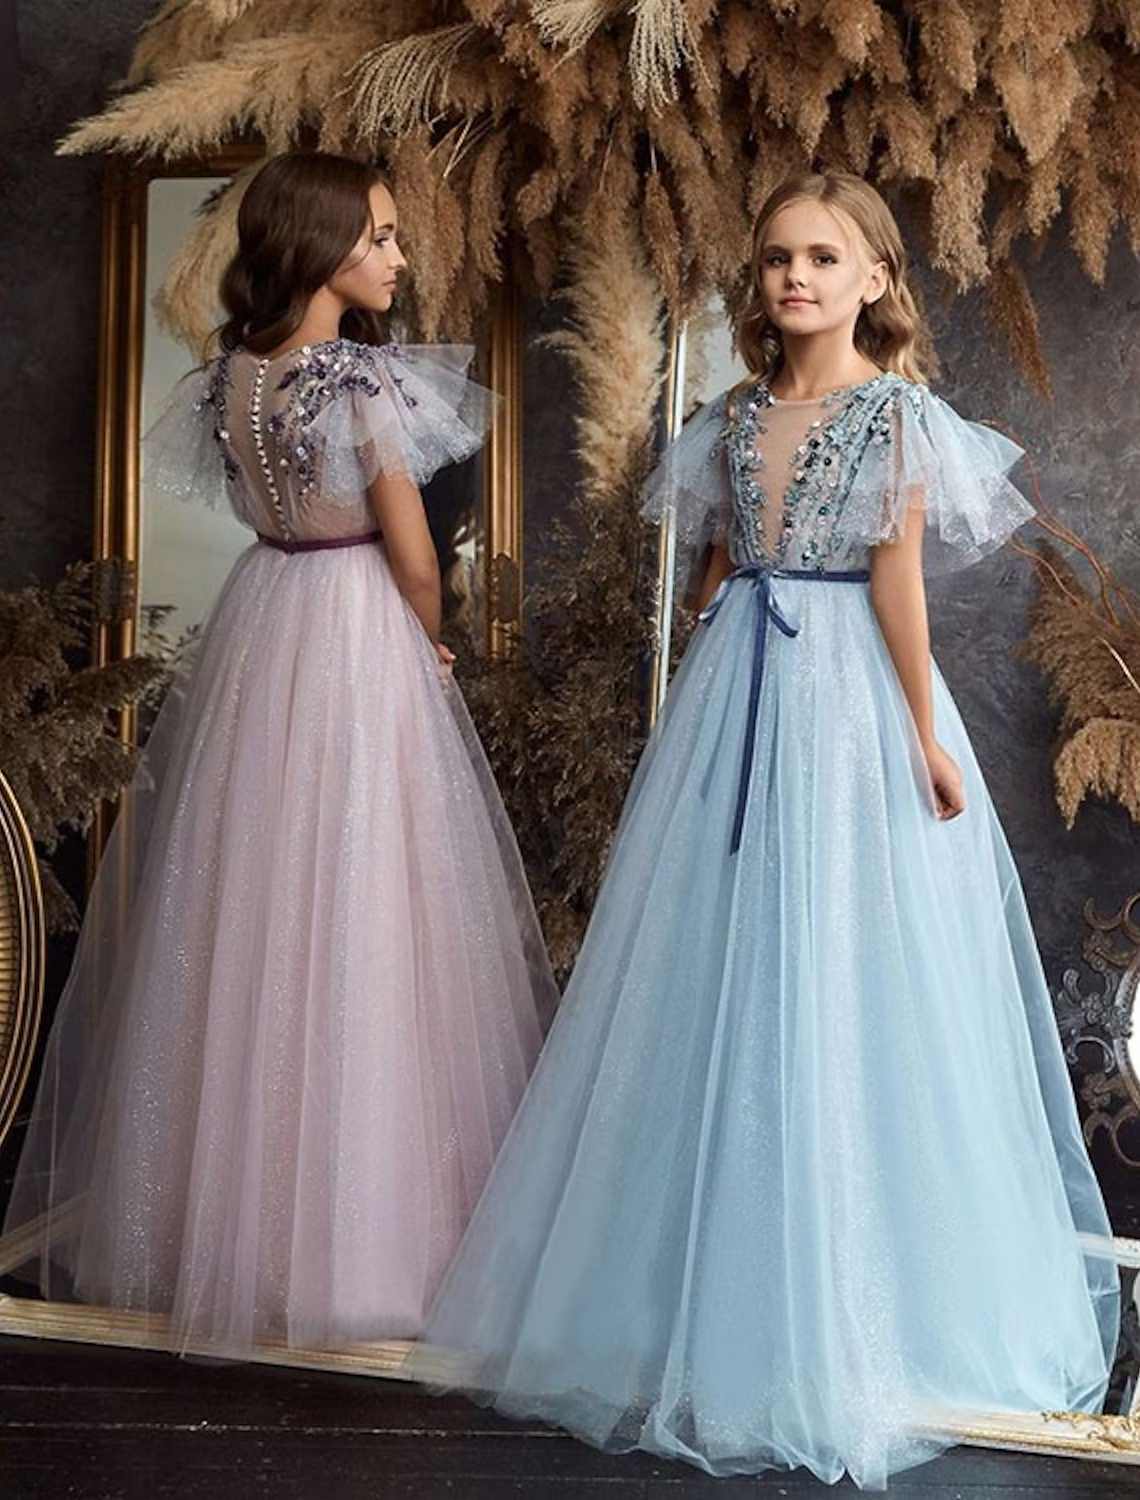 A-Line Floor Length Flower Girl Dress Halloween Cute Prom Dress Chiffon with Appliques Fit 3-16 Years